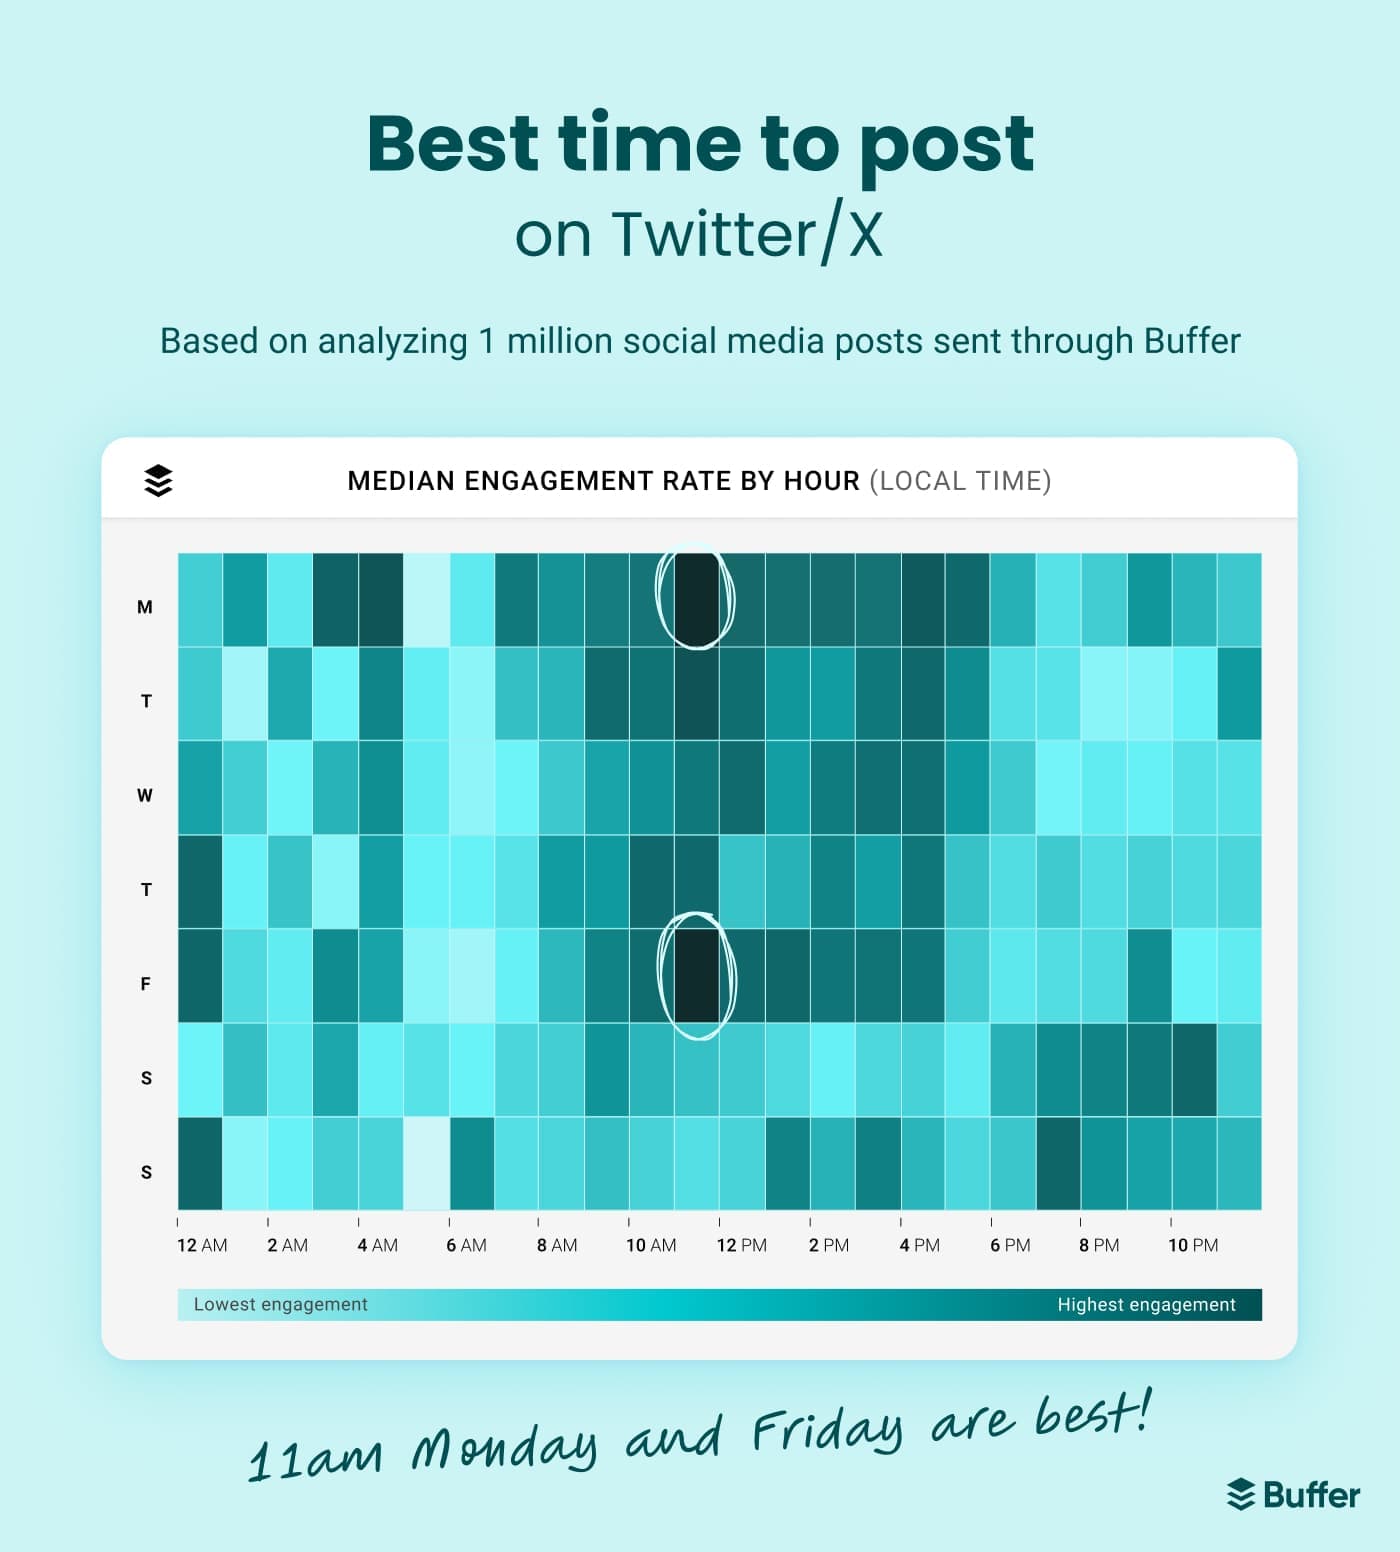 Heatmap charting the best time to post on X/Twitter based on analyzing 1 million social media posts sent through Buffer. 11am on Monday and Friday is best, with 2pm to 4pm on weekdays also performing well.